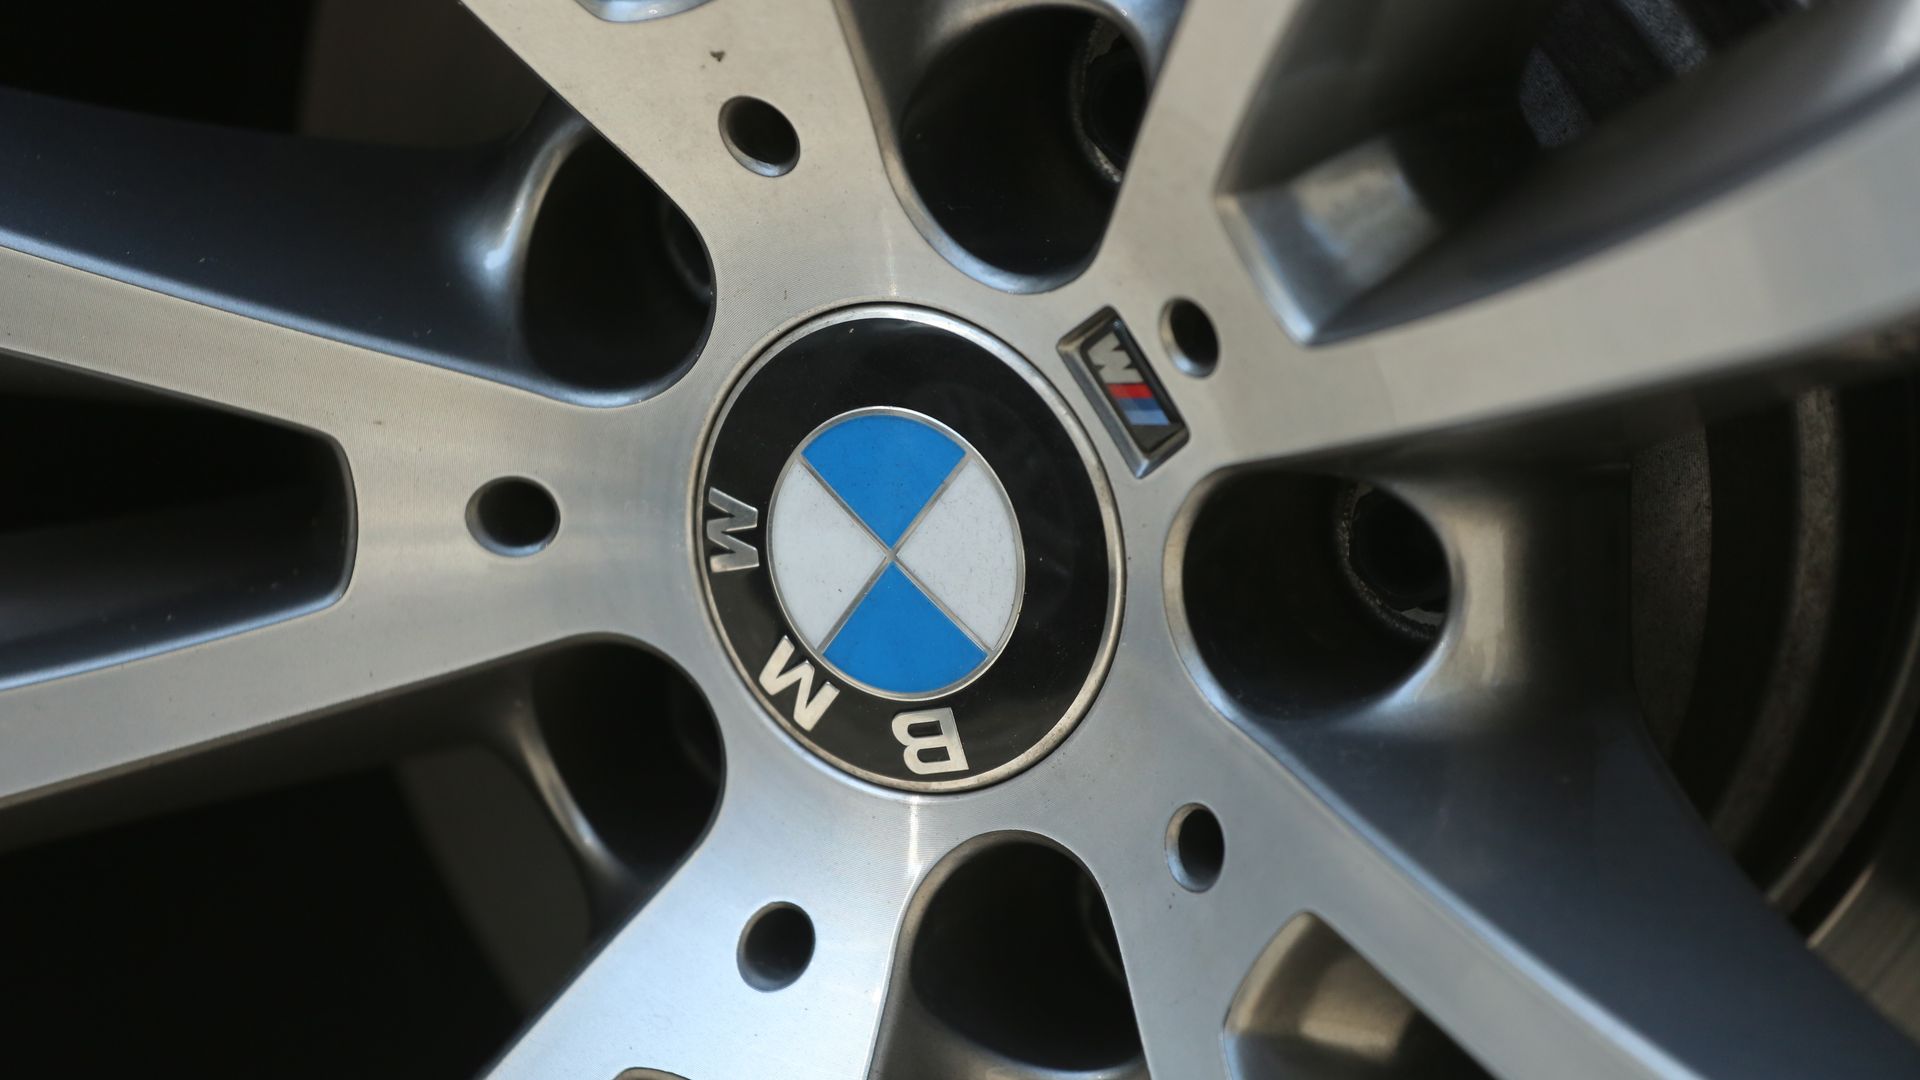 BMW weel and logo.